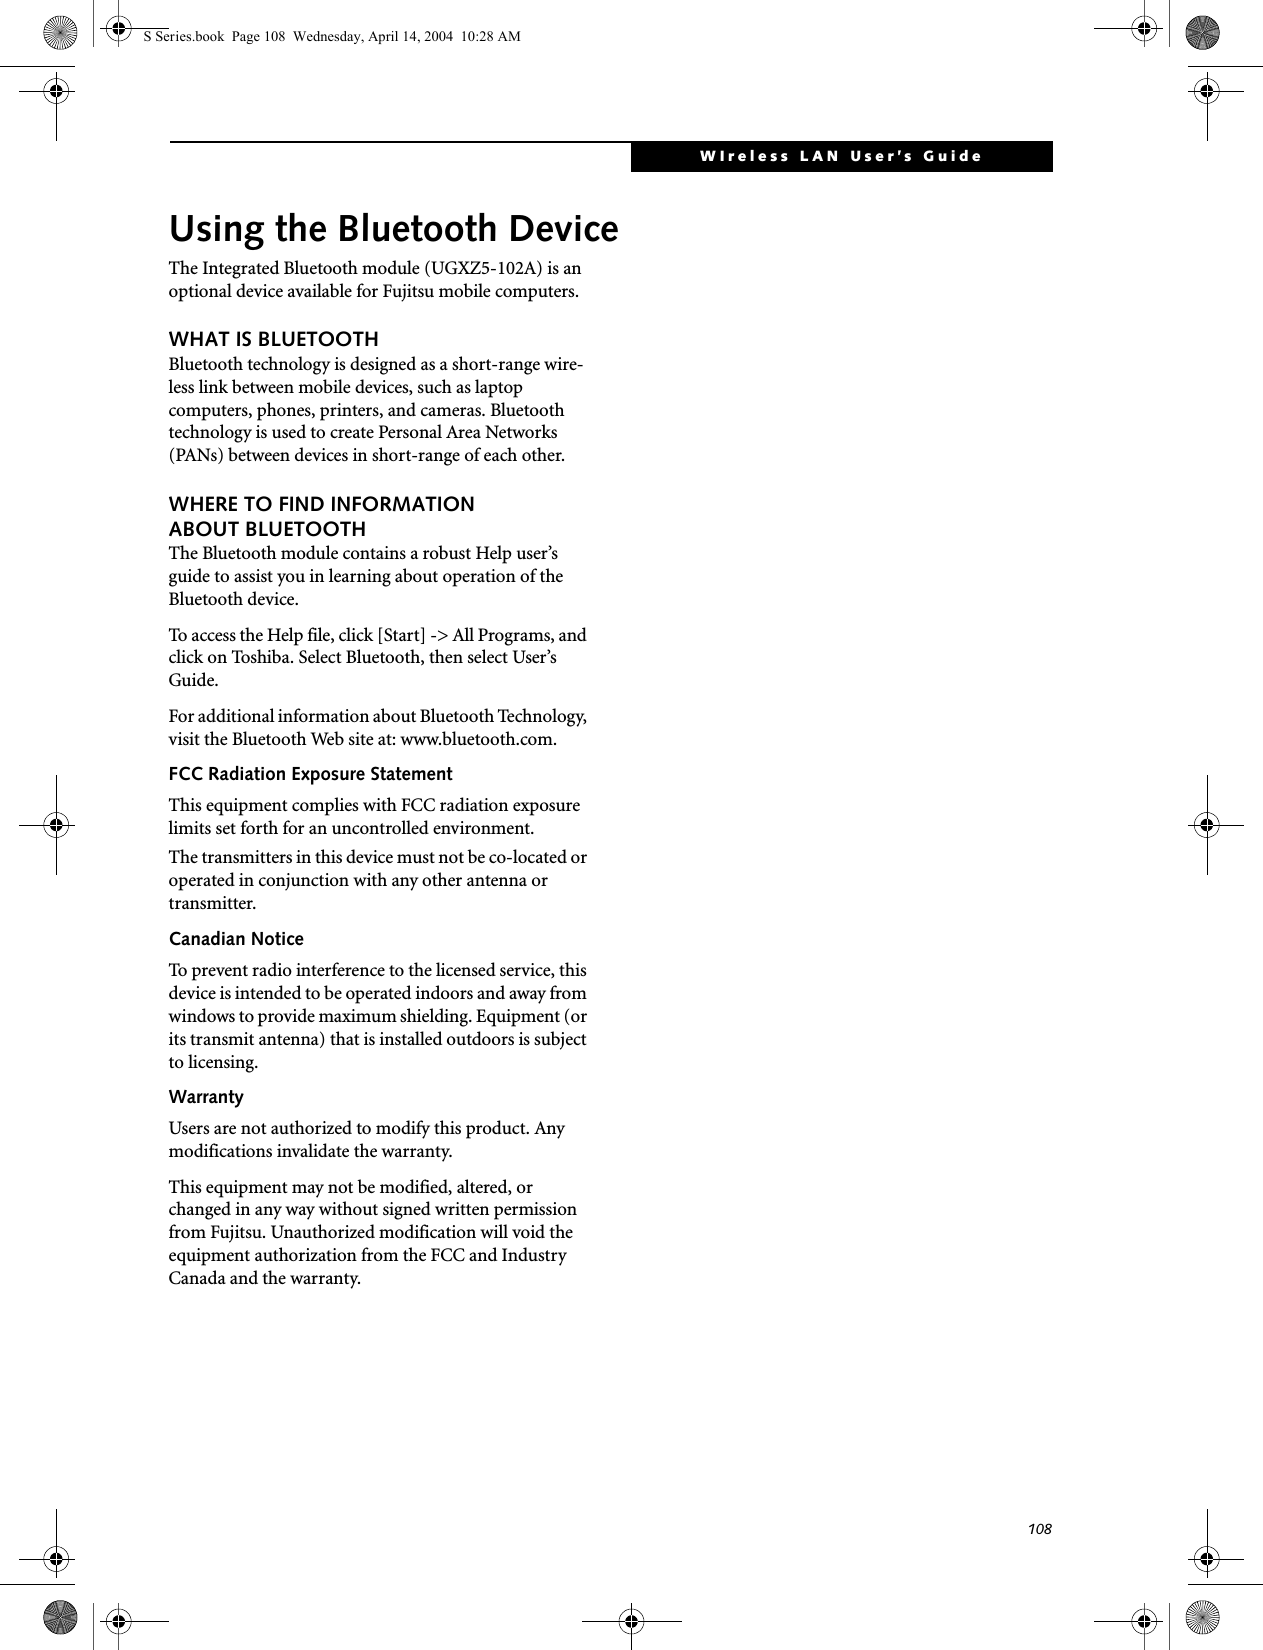 108WIreless LAN User’s Guide Using the Bluetooth DeviceThe Integrated Bluetooth module (UGXZ5-102A) is an optional device available for Fujitsu mobile computers. WHAT IS BLUETOOTHBluetooth technology is designed as a short-range wire-less link between mobile devices, such as laptop computers, phones, printers, and cameras. Bluetooth technology is used to create Personal Area Networks (PANs) between devices in short-range of each other. WHERE TO FIND INFORMATIONABOUT BLUETOOTHThe Bluetooth module contains a robust Help user’s guide to assist you in learning about operation of the Bluetooth device.To access the Help file, click [Start] -&gt; All Programs, and click on Toshiba. Select Bluetooth, then select User’s Guide.For additional information about Bluetooth Technology, visit the Bluetooth Web site at: www.bluetooth.com.FCC Radiation Exposure StatementThis equipment complies with FCC radiation exposure limits set forth for an uncontrolled environment. The transmitters in this device must not be co-located or operated in conjunction with any other antenna or transmitter.Canadian NoticeTo prevent radio interference to the licensed service, this device is intended to be operated indoors and away from windows to provide maximum shielding. Equipment (or its transmit antenna) that is installed outdoors is subject to licensing.WarrantyUsers are not authorized to modify this product. Any modifications invalidate the warranty.This equipment may not be modified, altered, or changed in any way without signed written permission from Fujitsu. Unauthorized modification will void the equipment authorization from the FCC and Industry Canada and the warranty.S Series.book  Page 108  Wednesday, April 14, 2004  10:28 AM